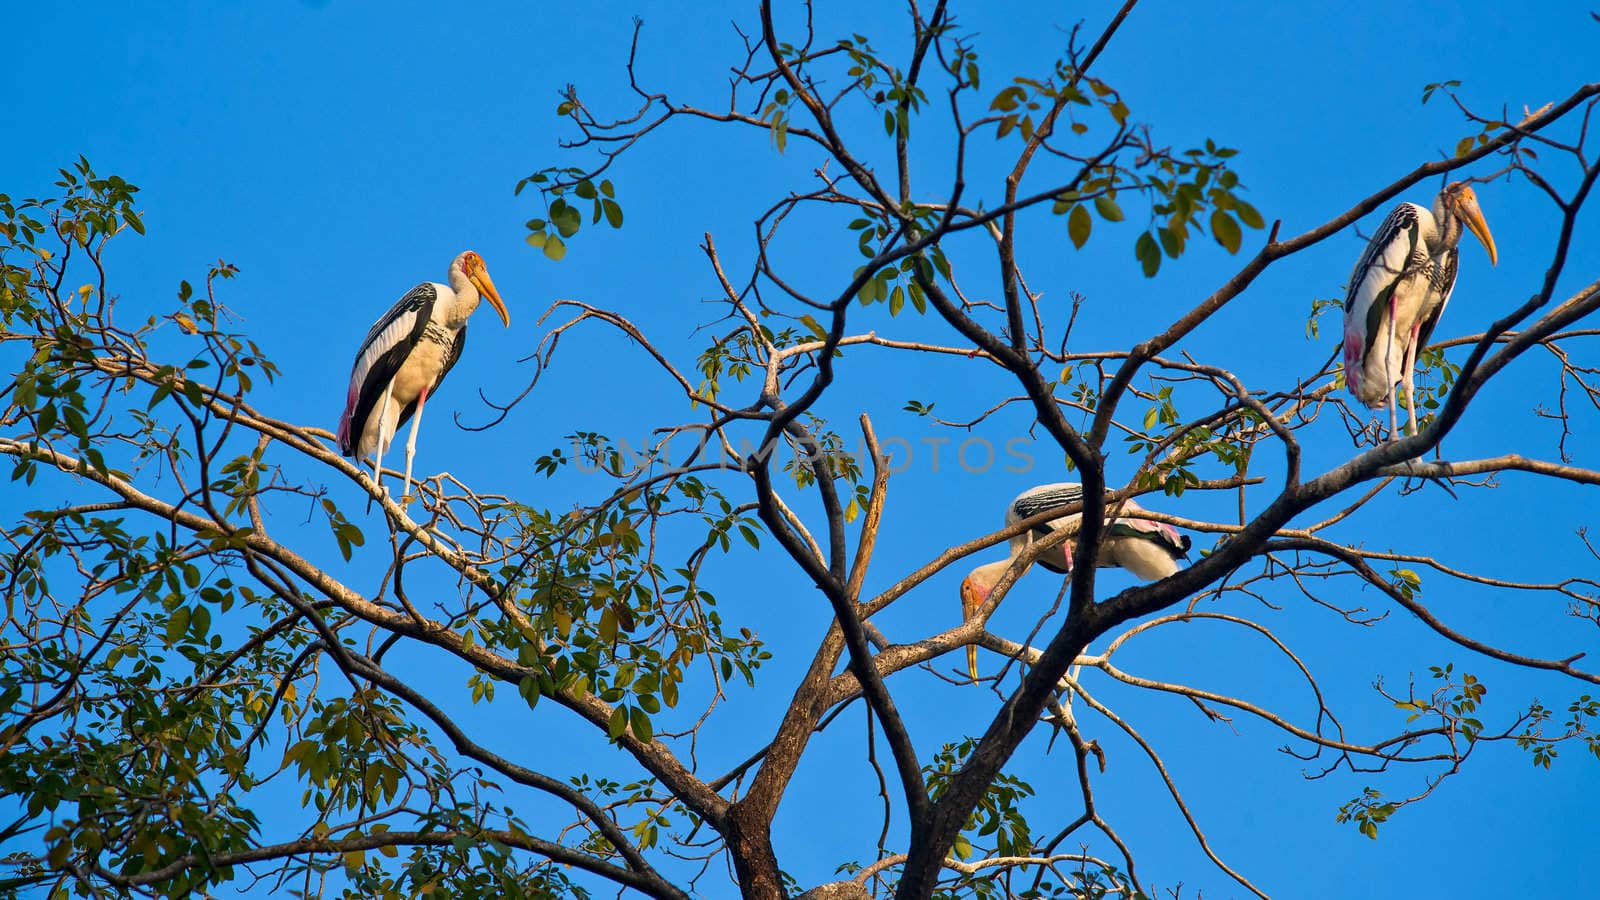 Painted storks on the branch of the tree